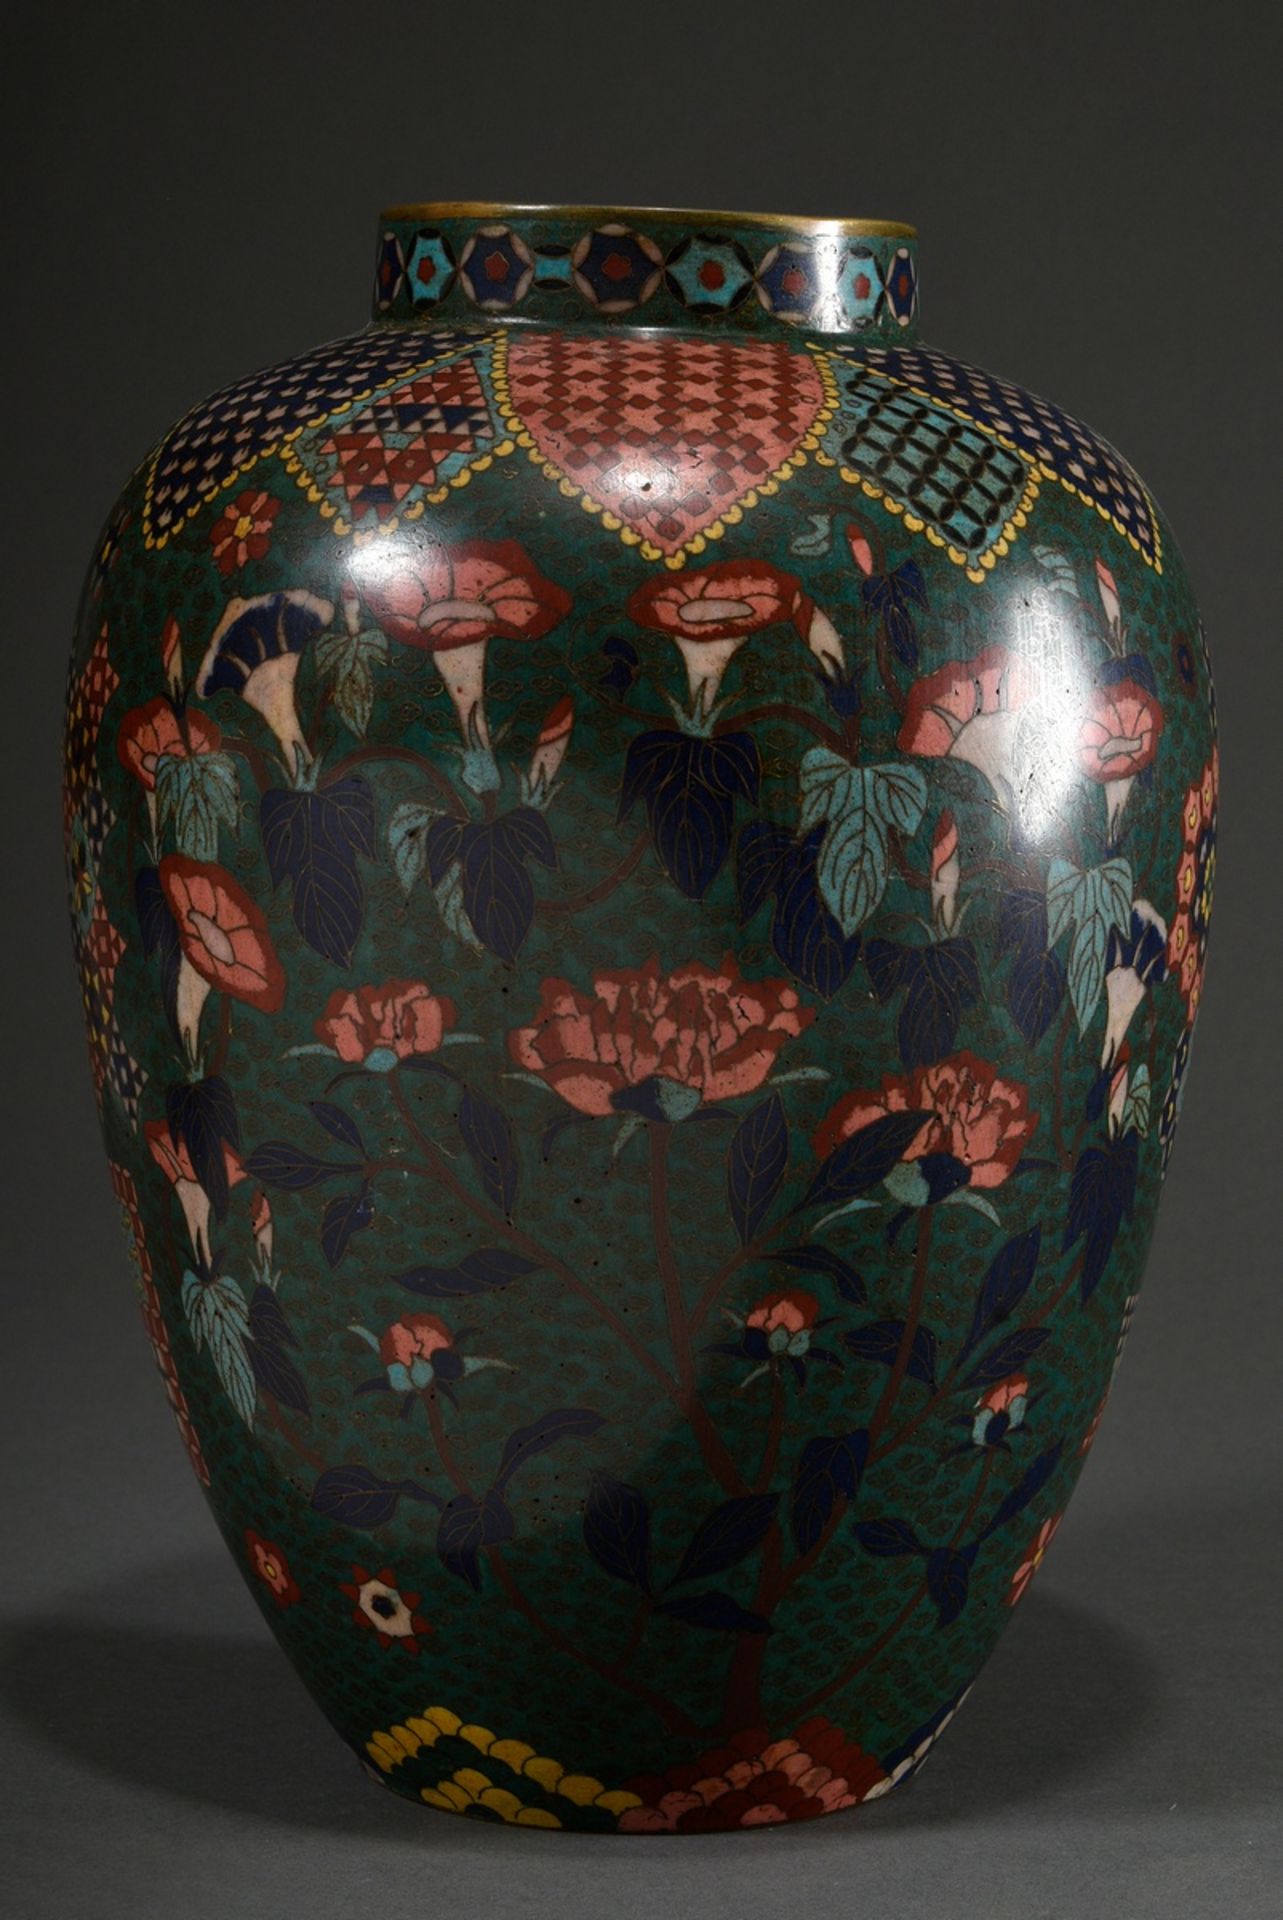 Large cloisonné shoulder vase with floral and geometric decoration in dark shades on a dark green b - Image 3 of 7